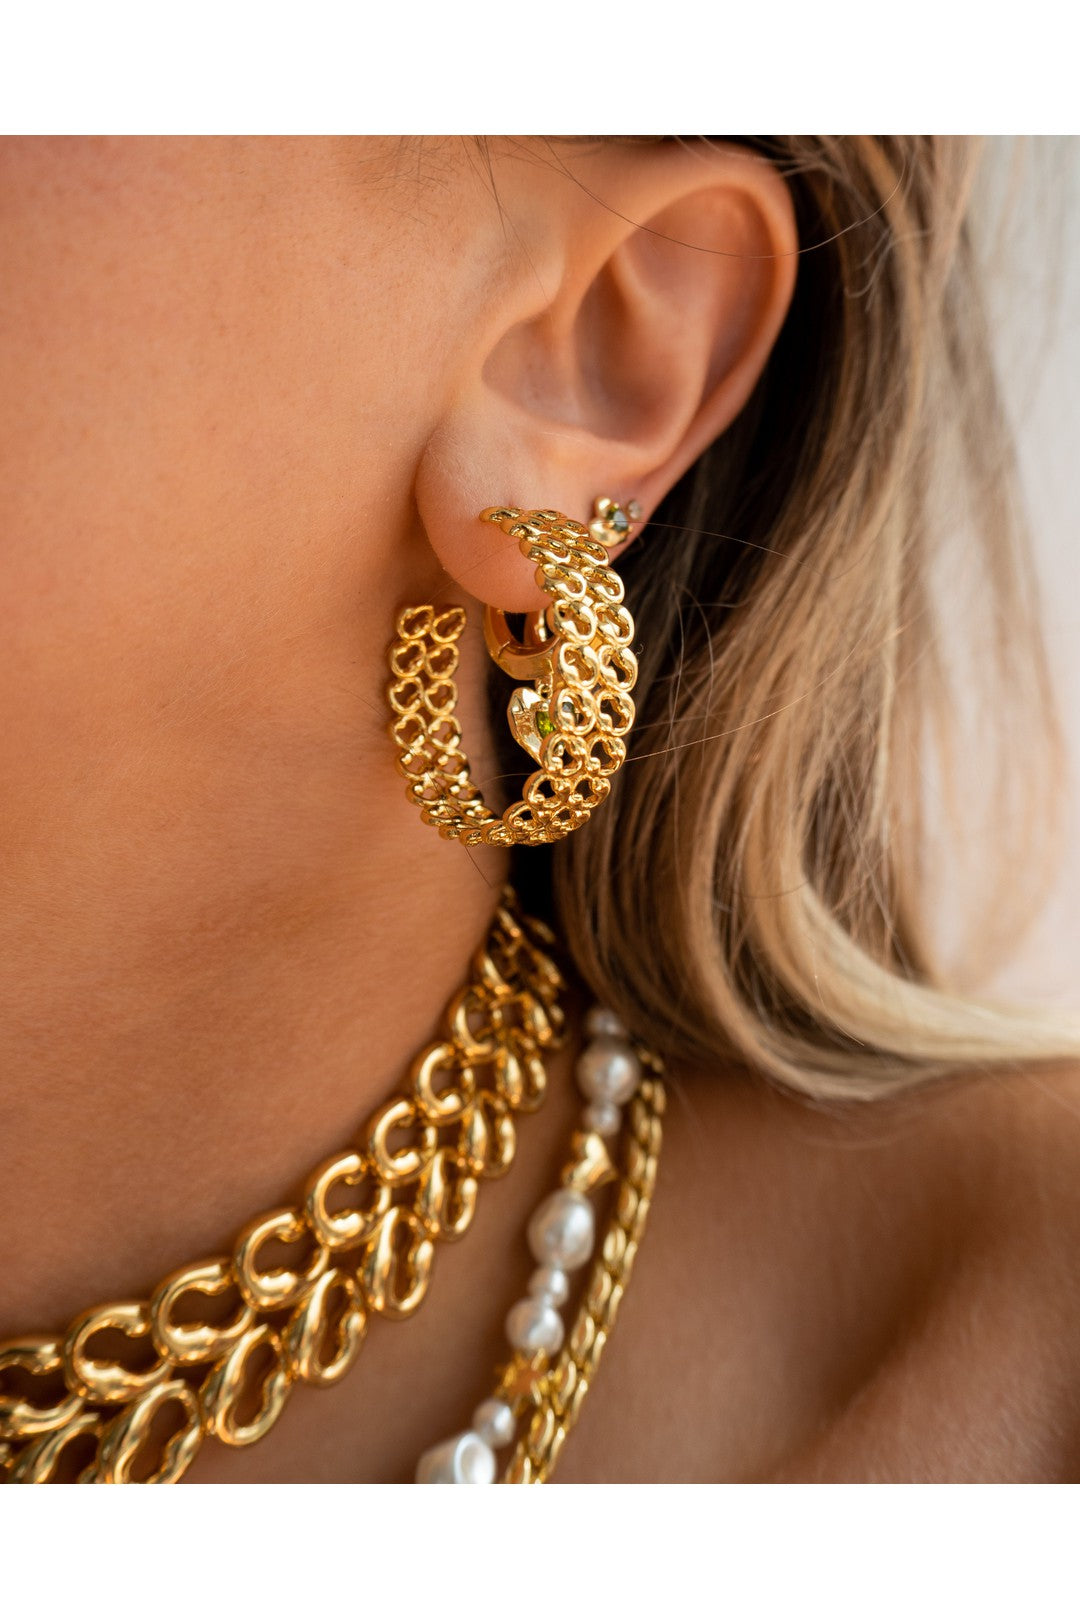 The metal lace hoops, gold